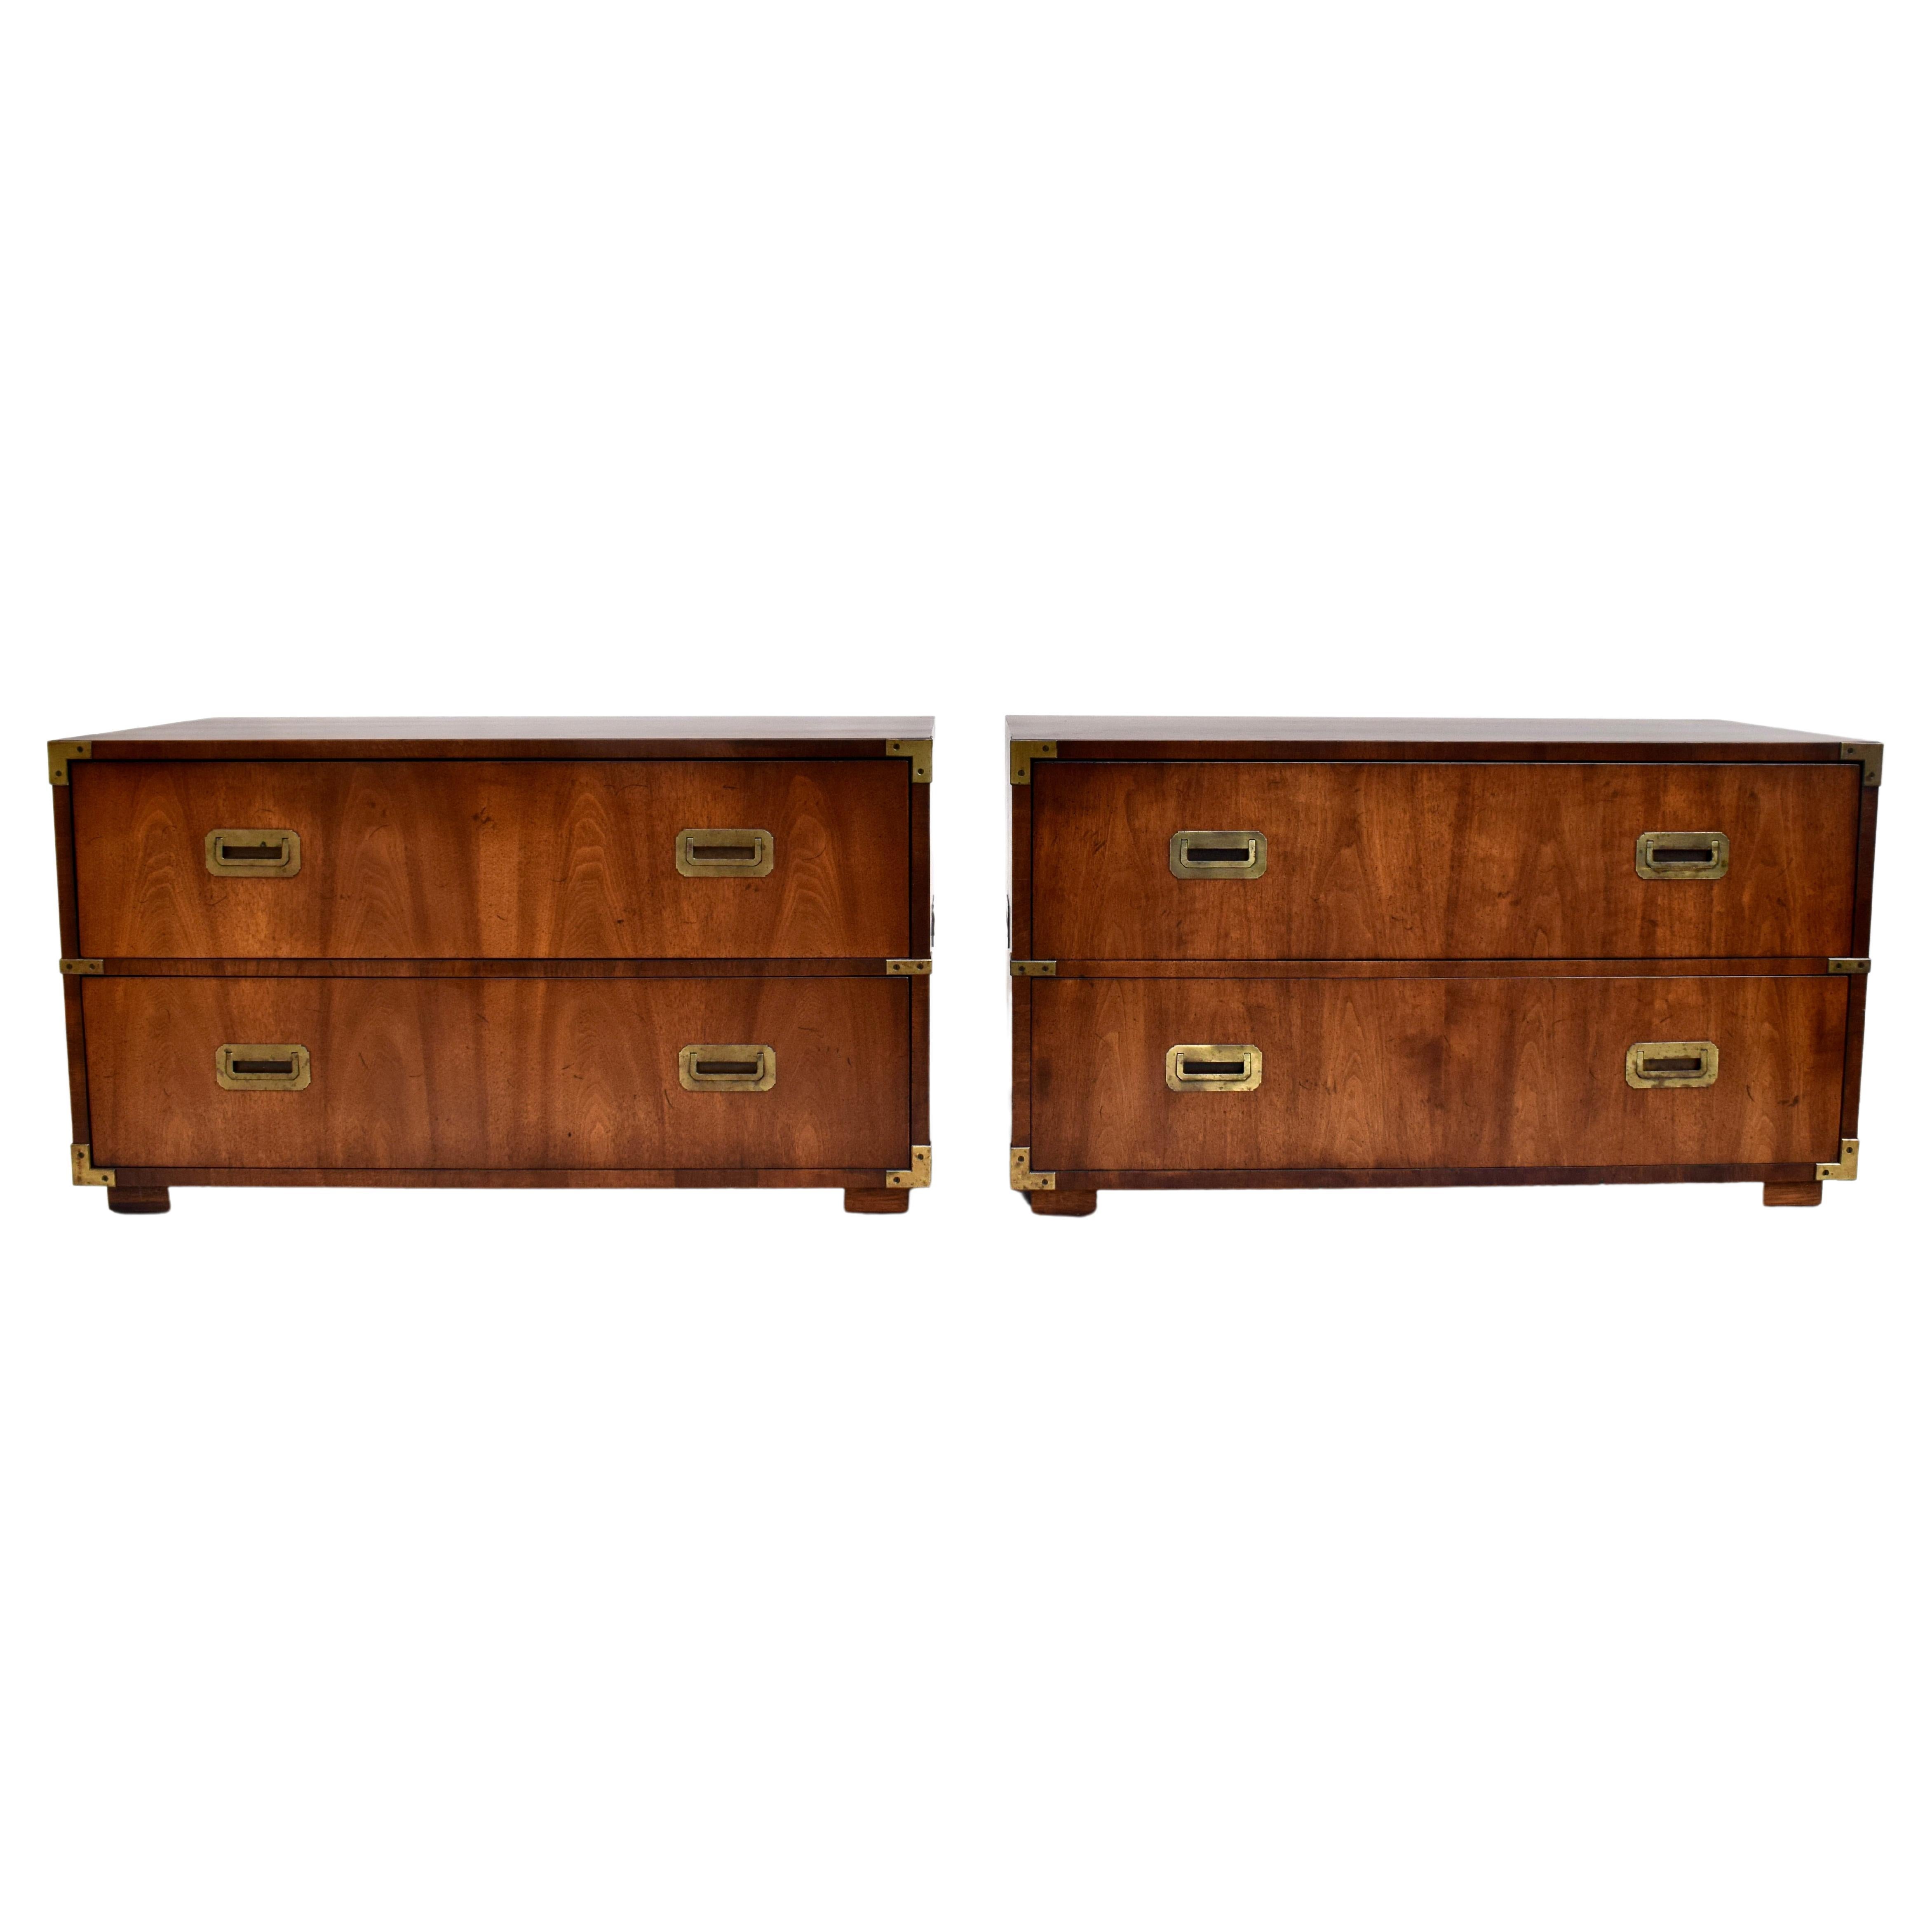 Pair of Campaign Chests by Henredon